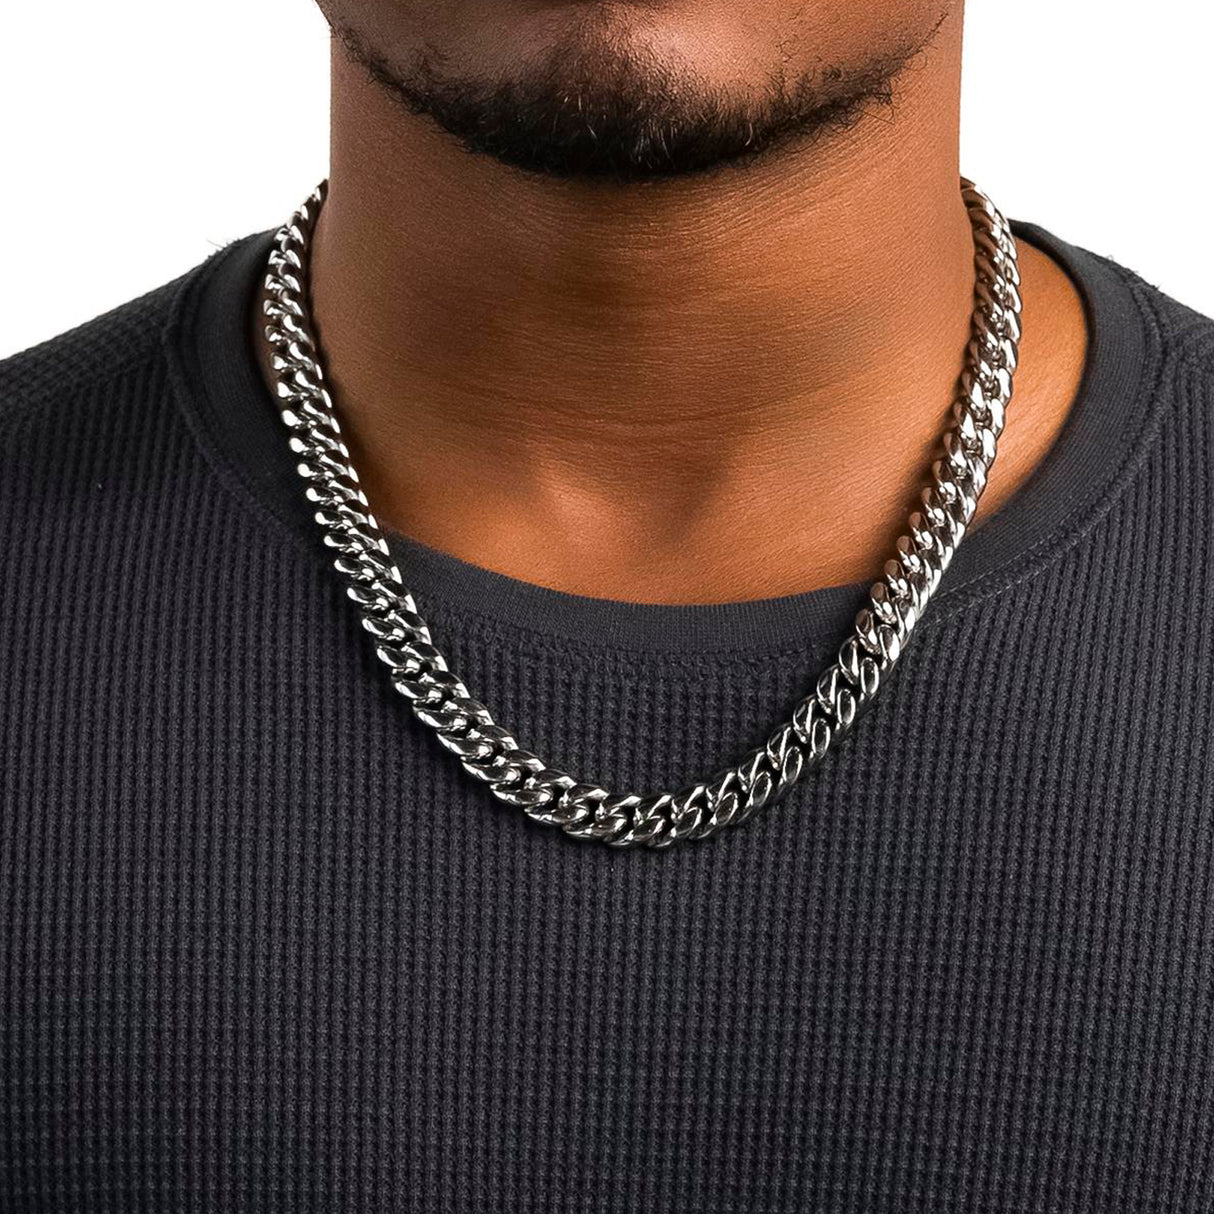 the-gold-gods-mens-jewelry-18k-white-gold-plated-miami-cuban-link-necklace-12mm-22inch-WGMC12MMC22-front